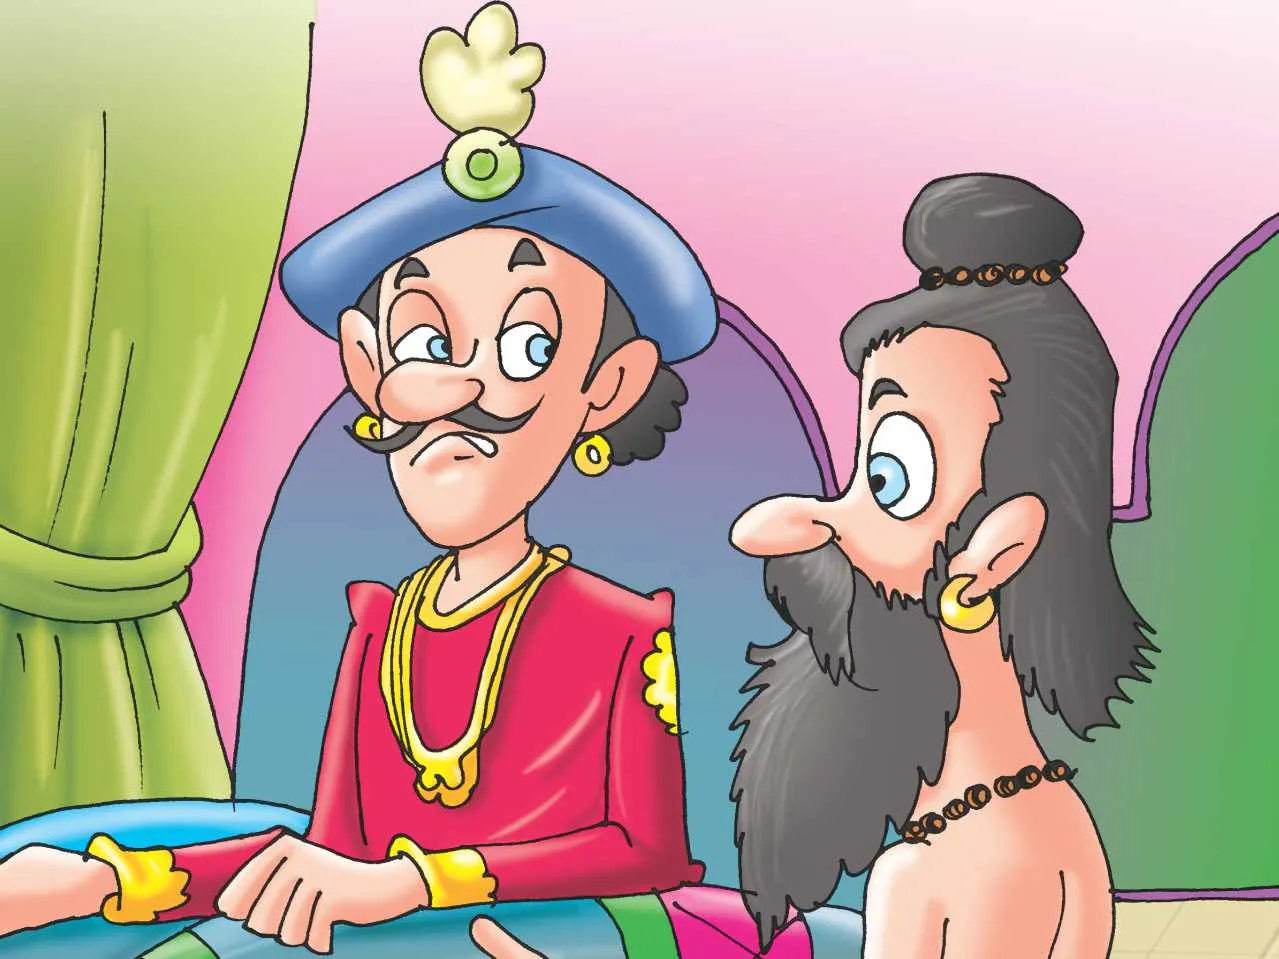 King and Saint in court room cartoon image